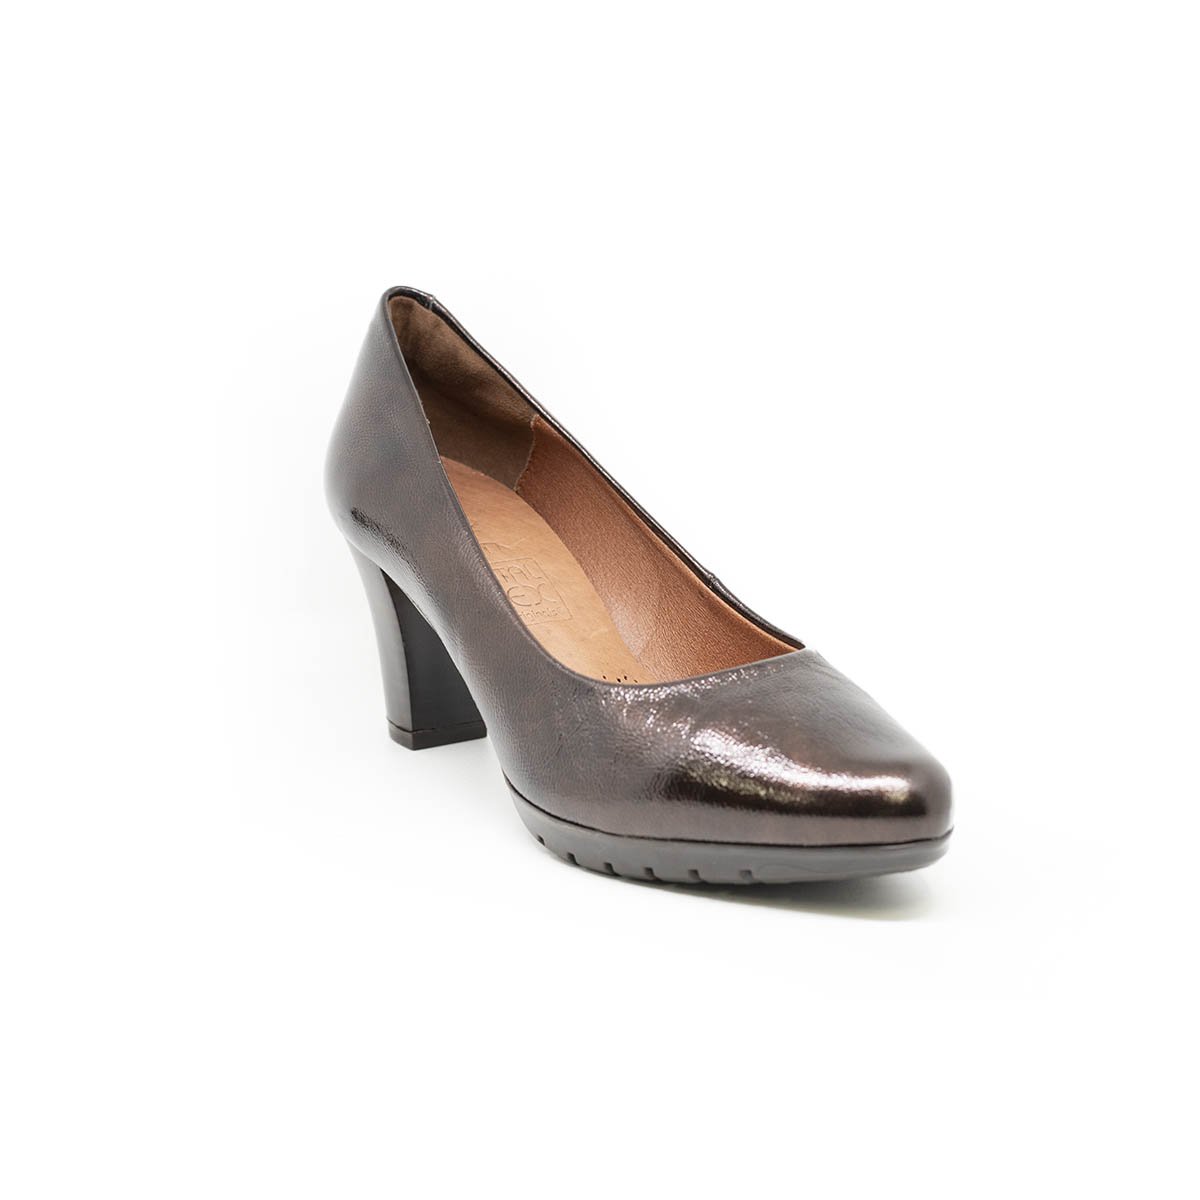 Desiree Shoes Davine DAVINE - Clearance Shoes Bronze / 6 / 37  Available at Illusions Lingerie